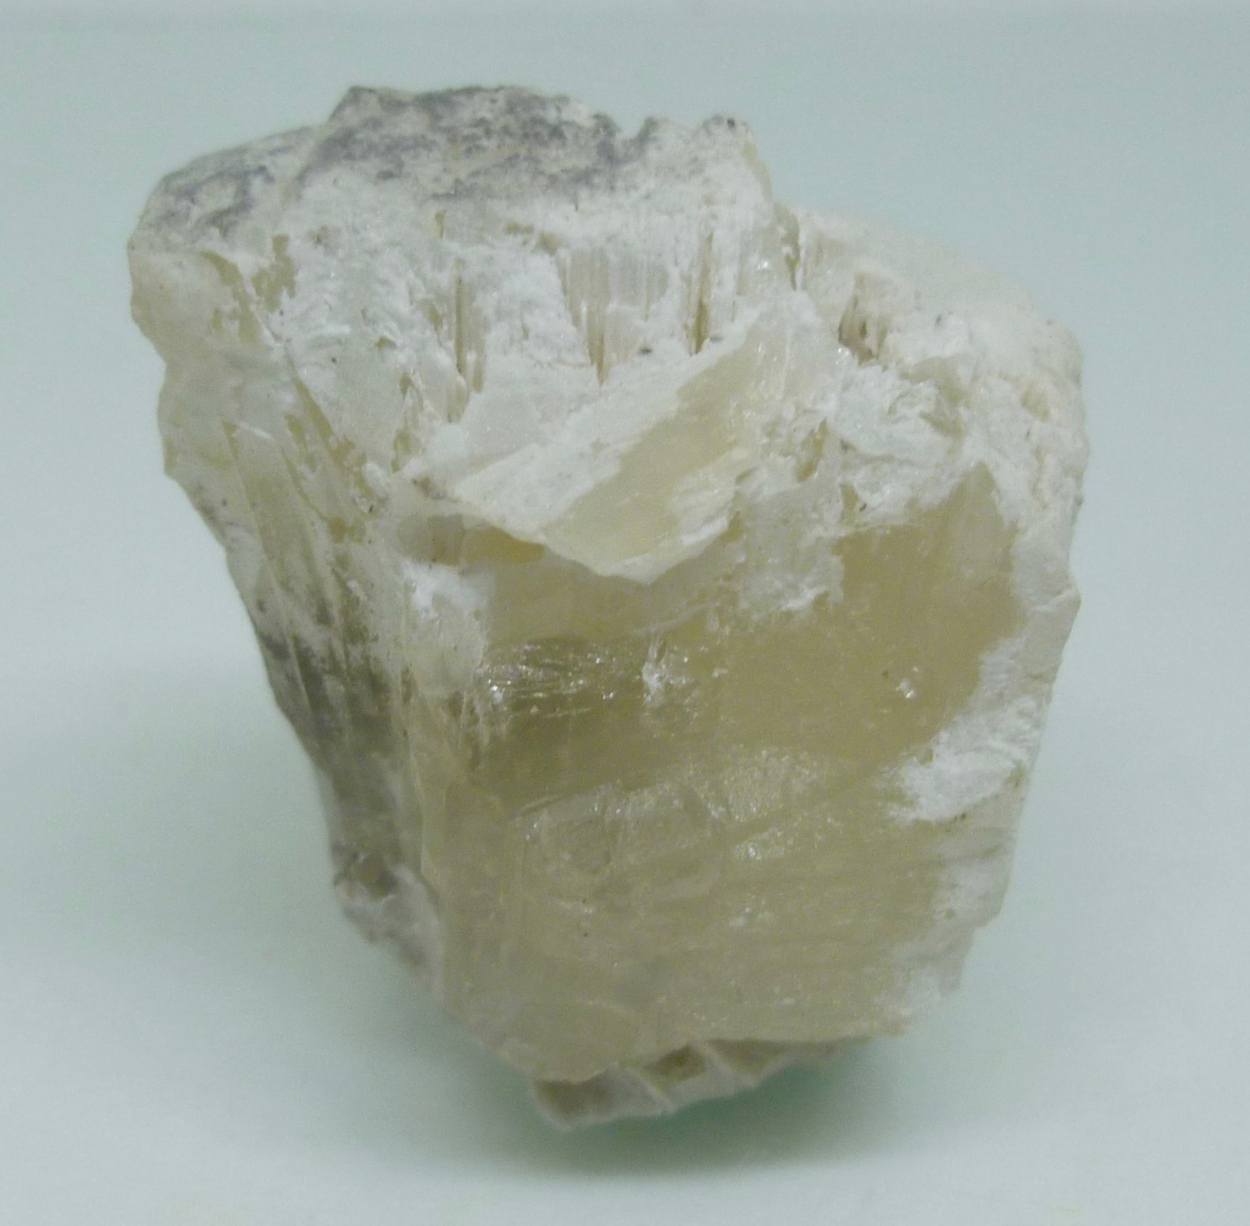 Witherite & Baryte